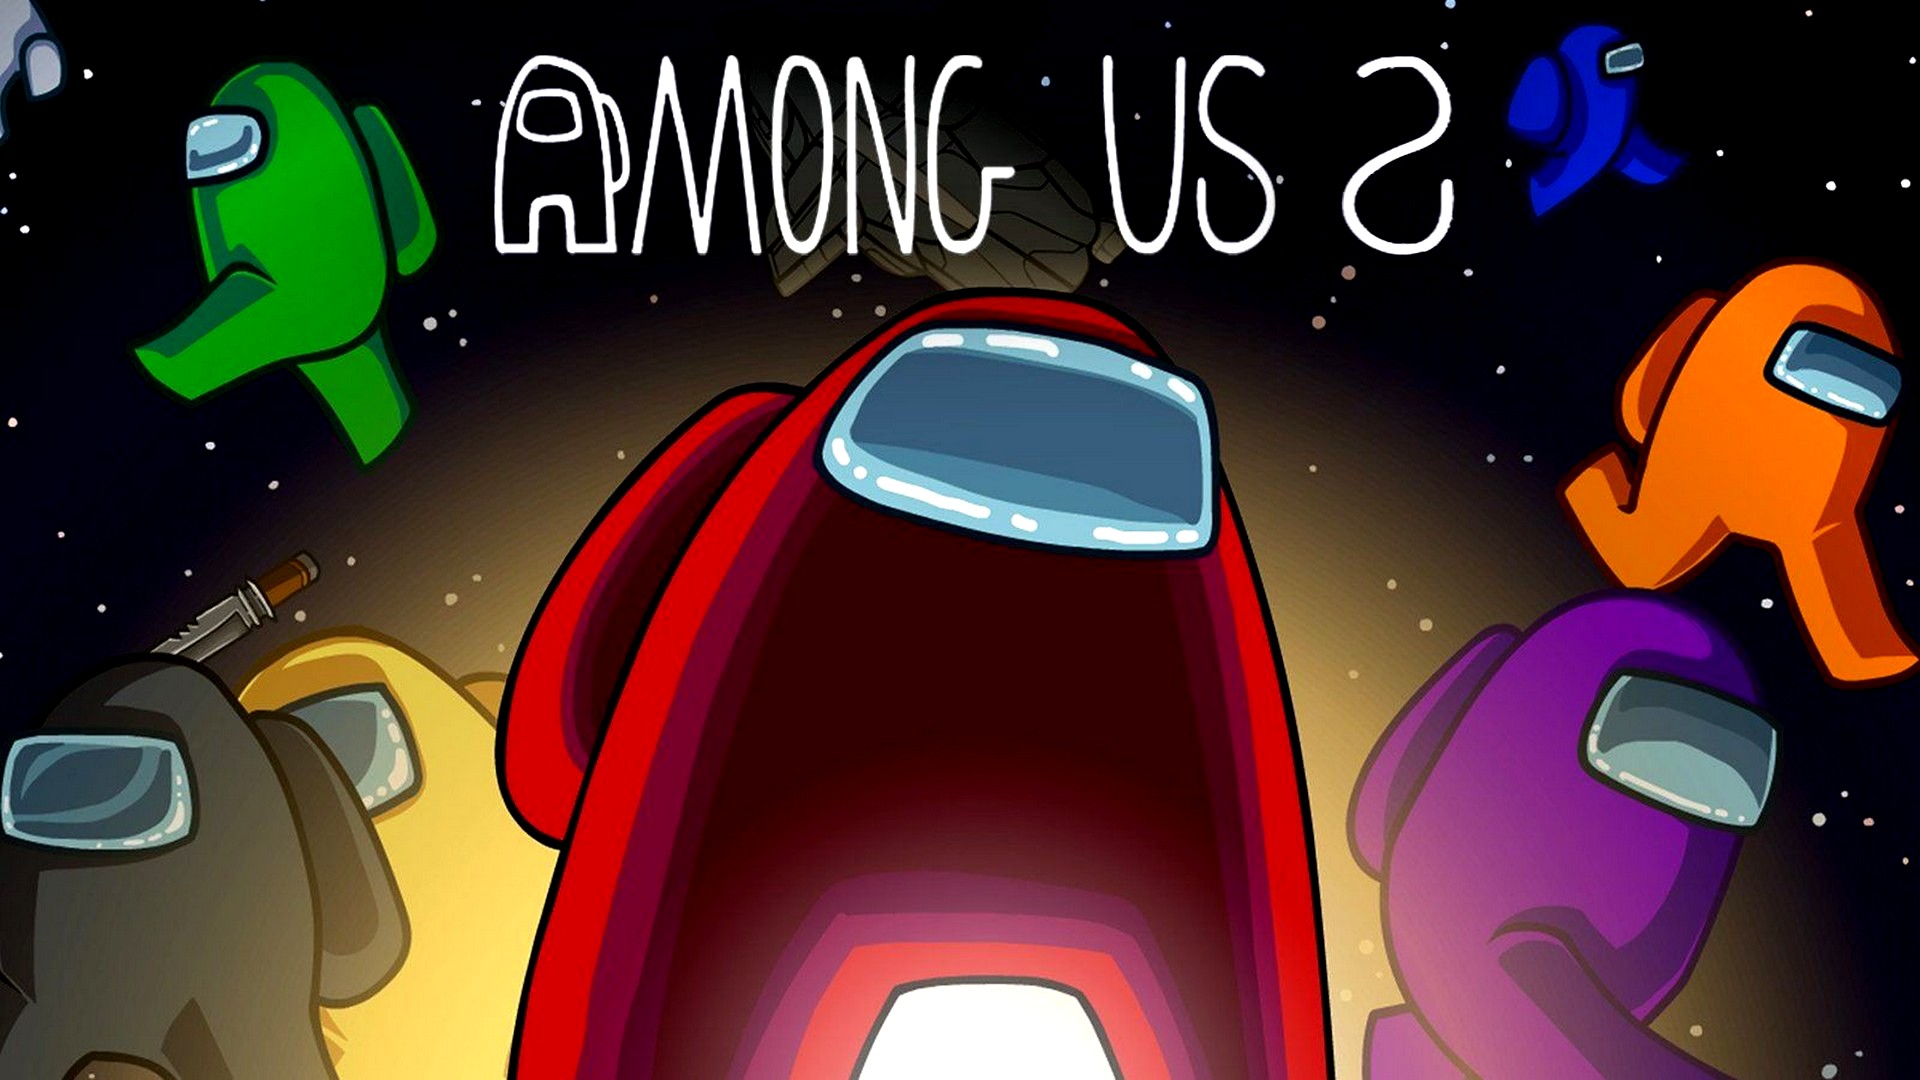 Among Us Mac Wallpaper with high-resolution 1920x1080 pixel. You can use and set as wallpaper for Notebook Screensavers, Mac Wallpapers, Mobile Home Screen, iPhone or Android Phones Lock Screen